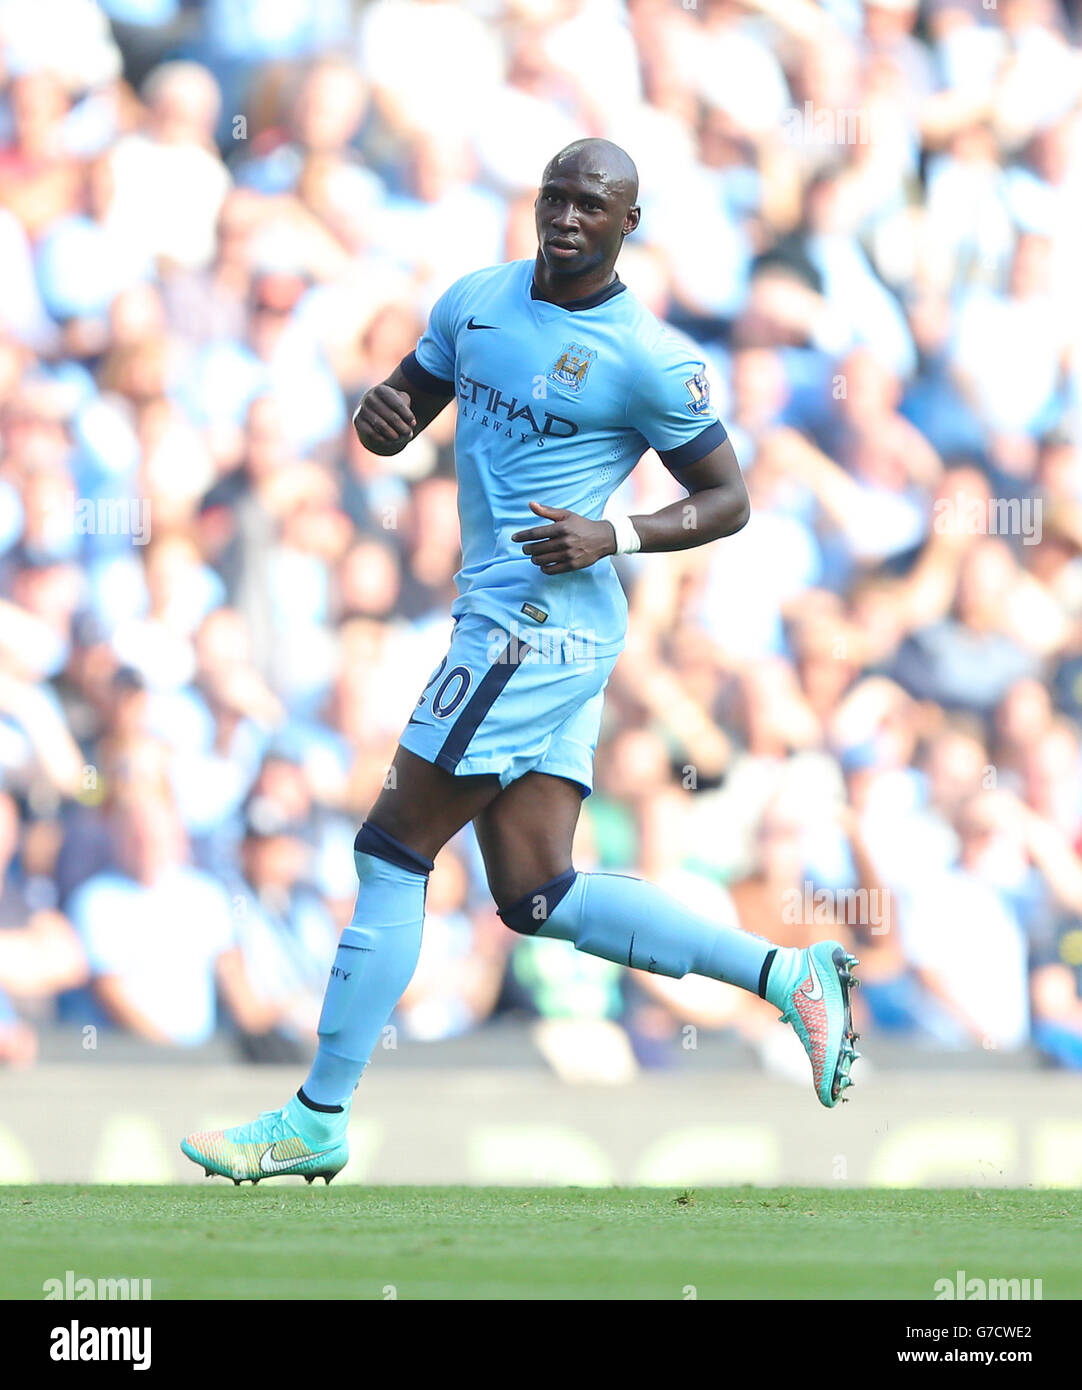 Manchester City's Eliaquim Mangala during the Barclays Premier League match  at the Etihad Stadium, Manchester Stock Photo - Alamy